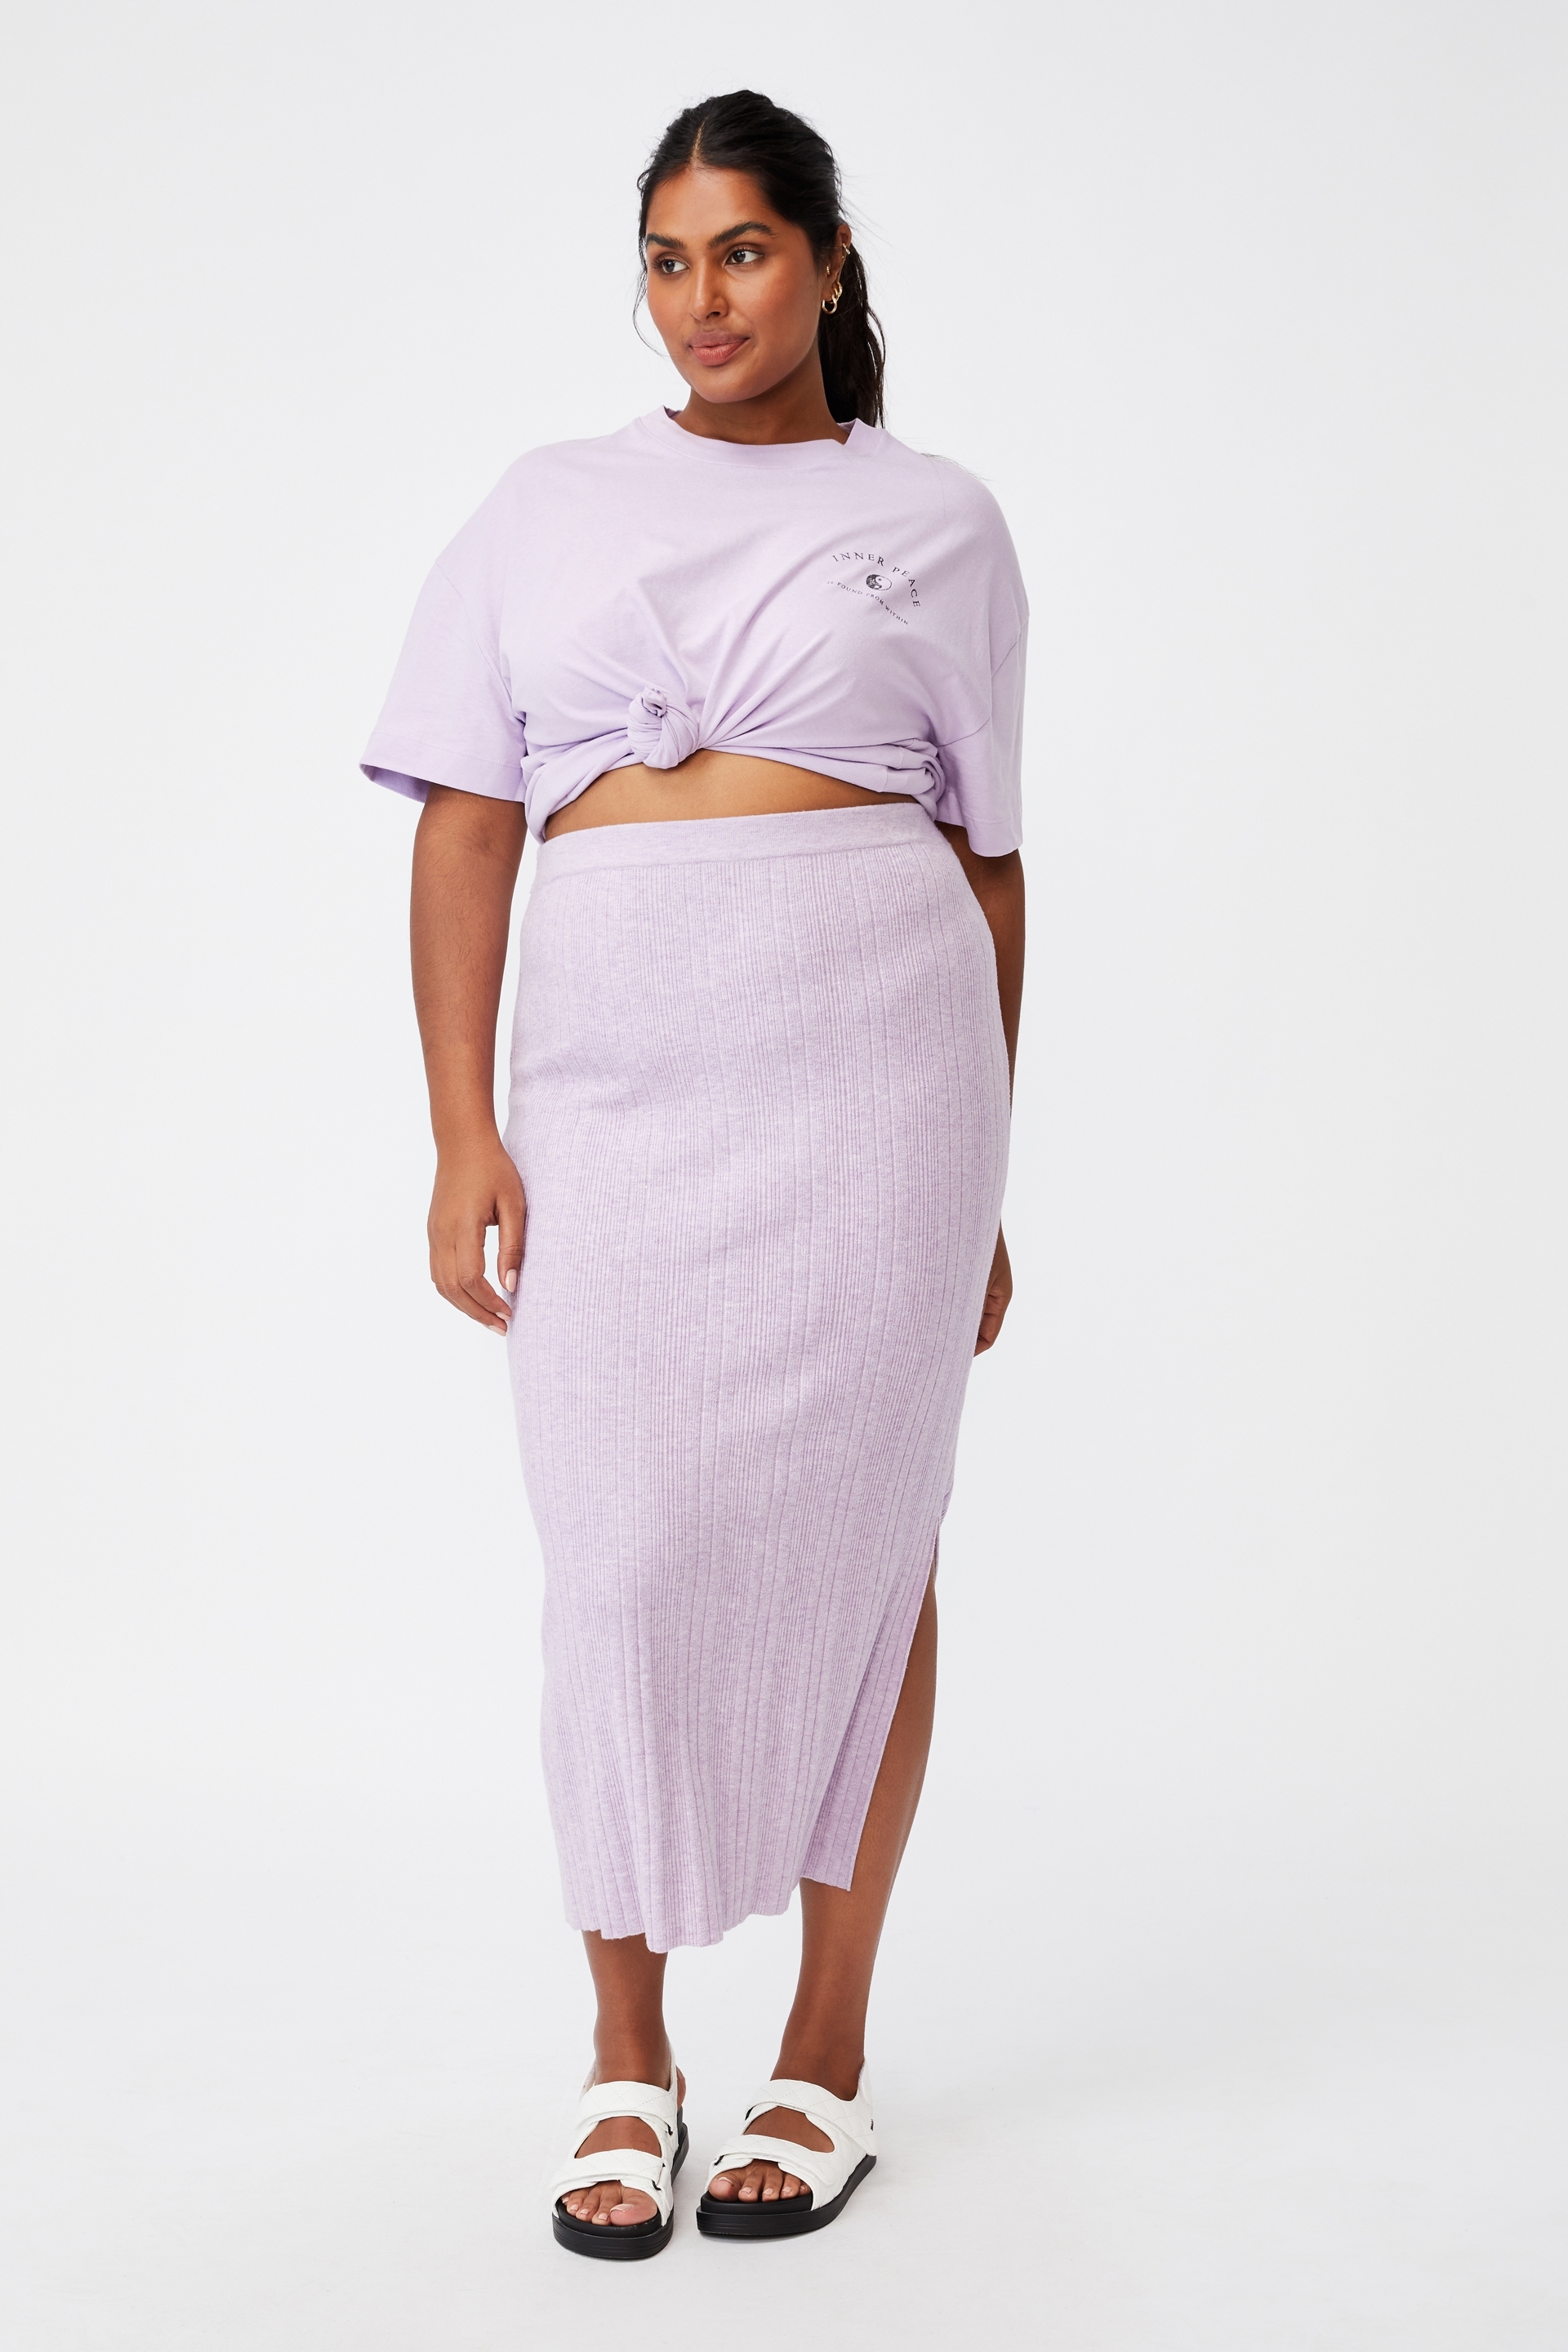 Cotton On Women - Curve Knit Midi Skirt - Lilac bloom marle